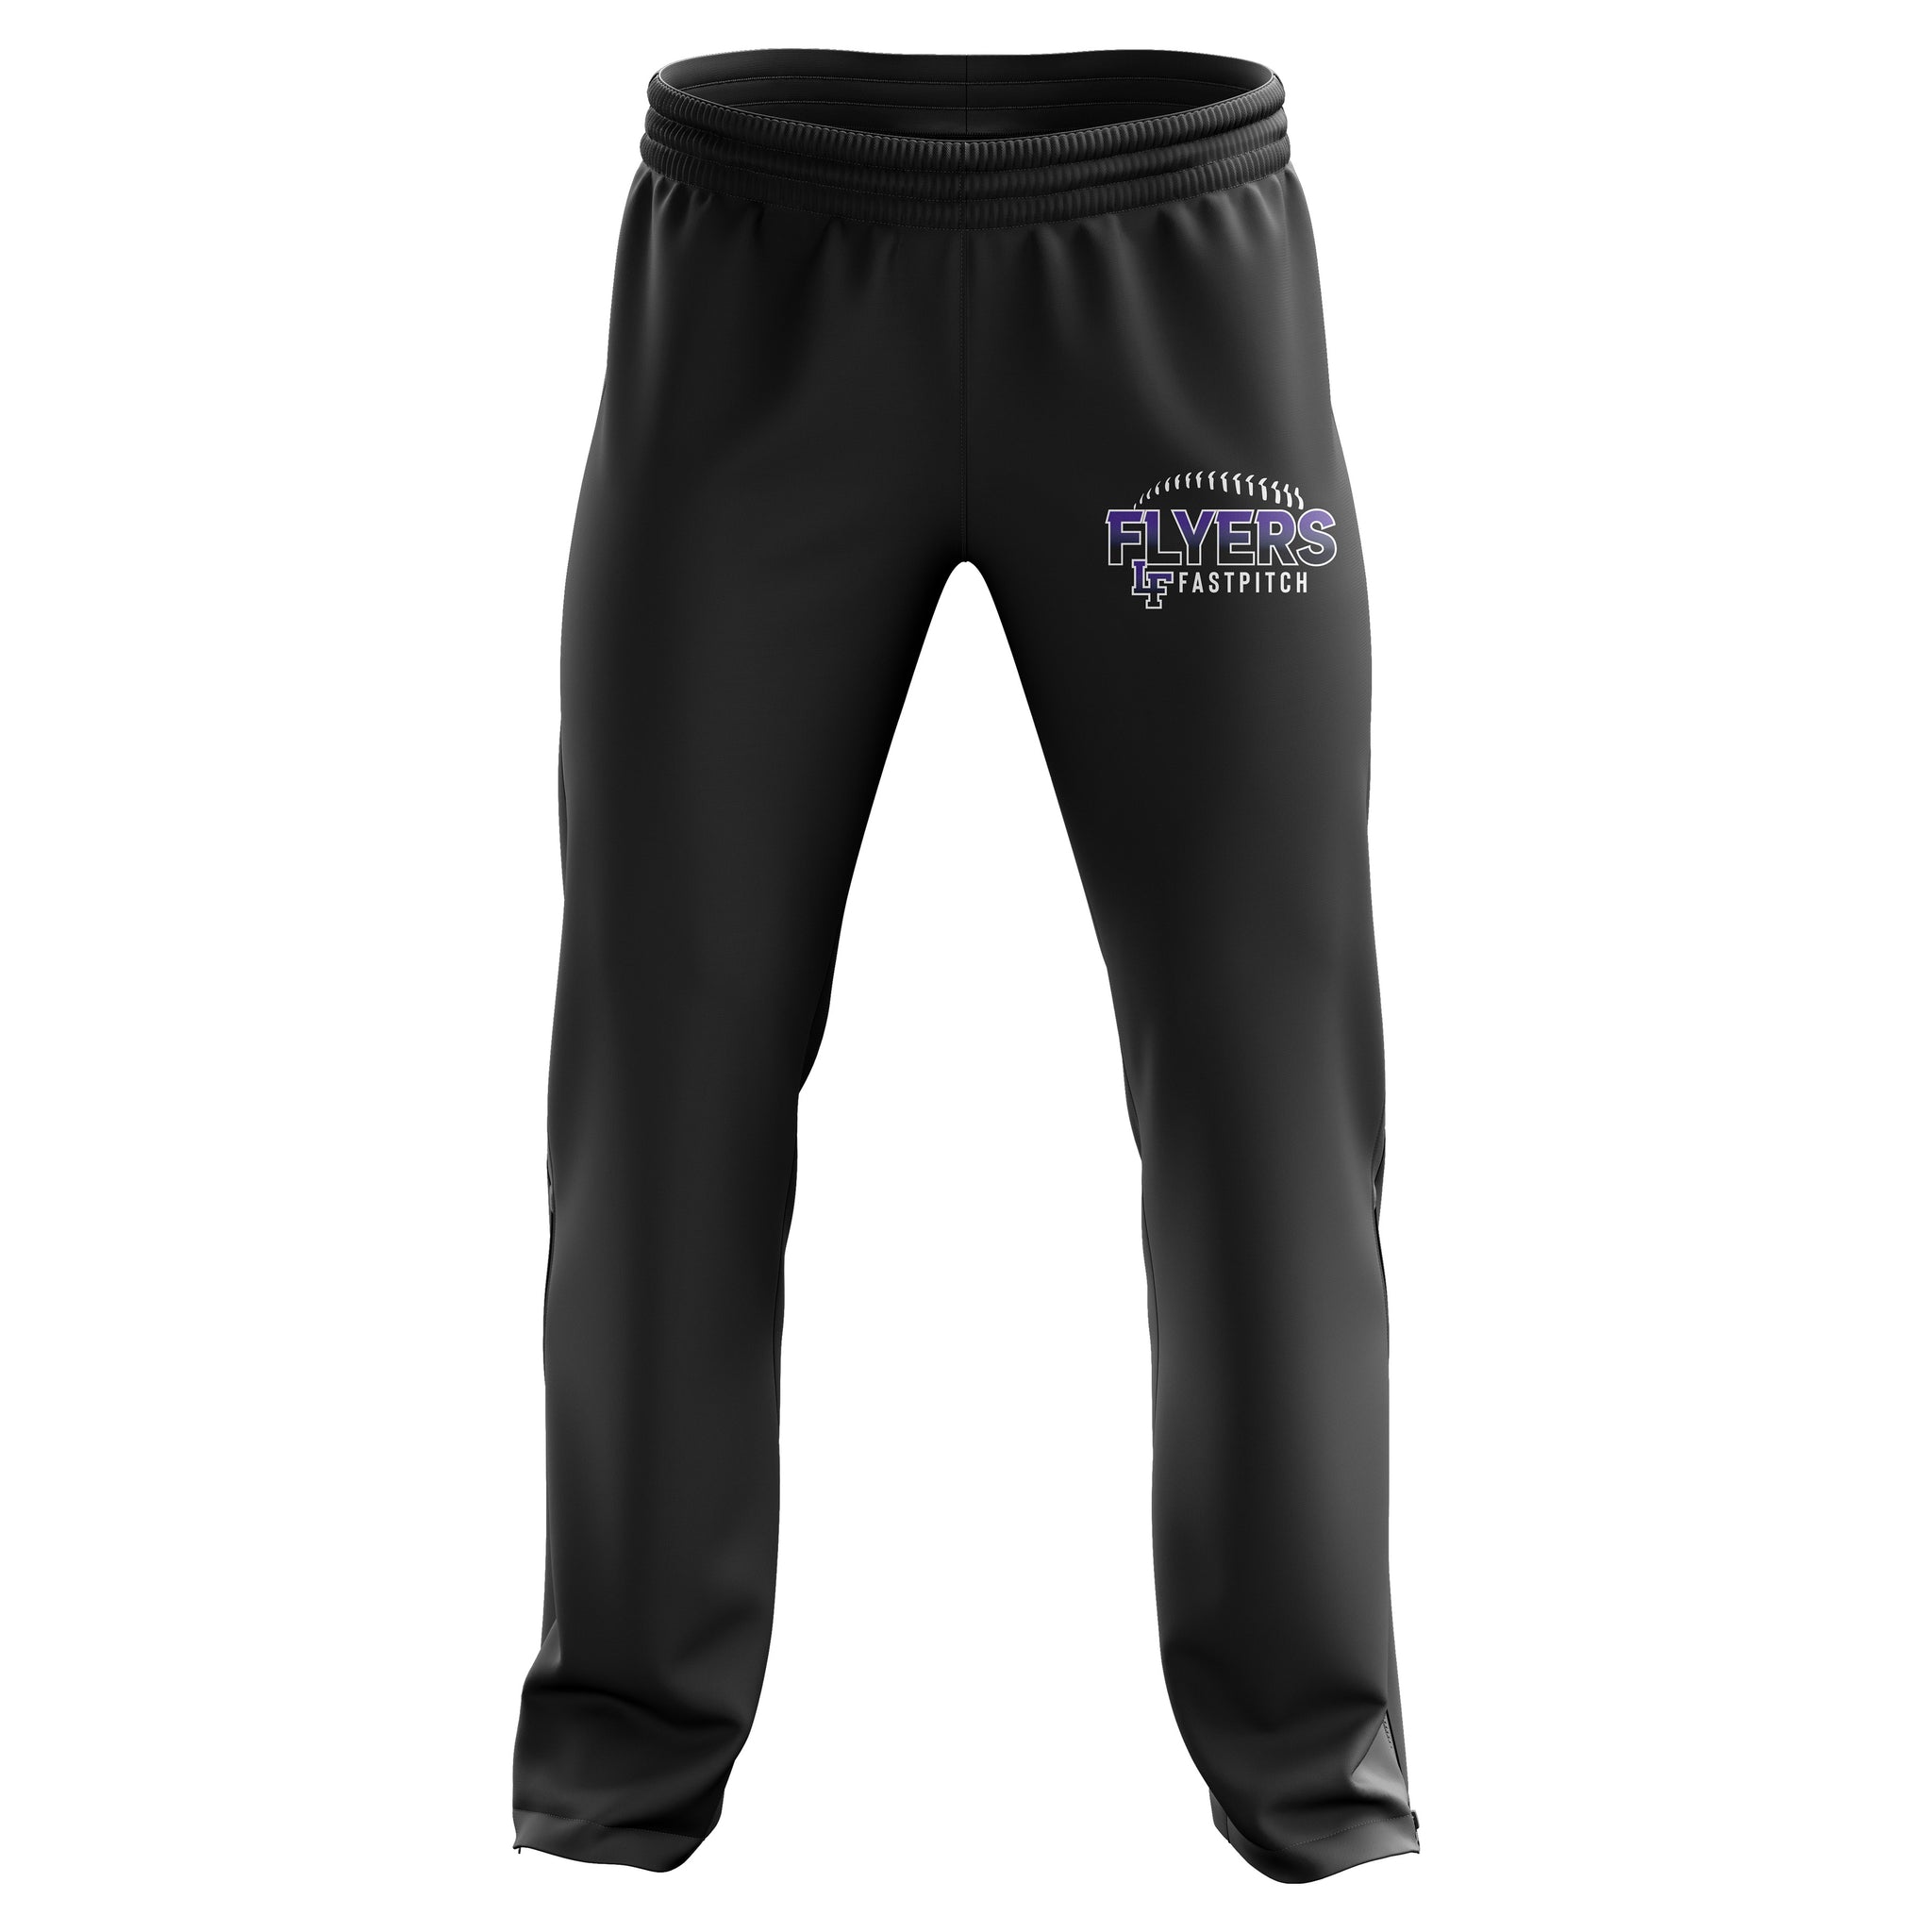 FLYERS FASTPITCH FULL SUB WARMUP PANTS